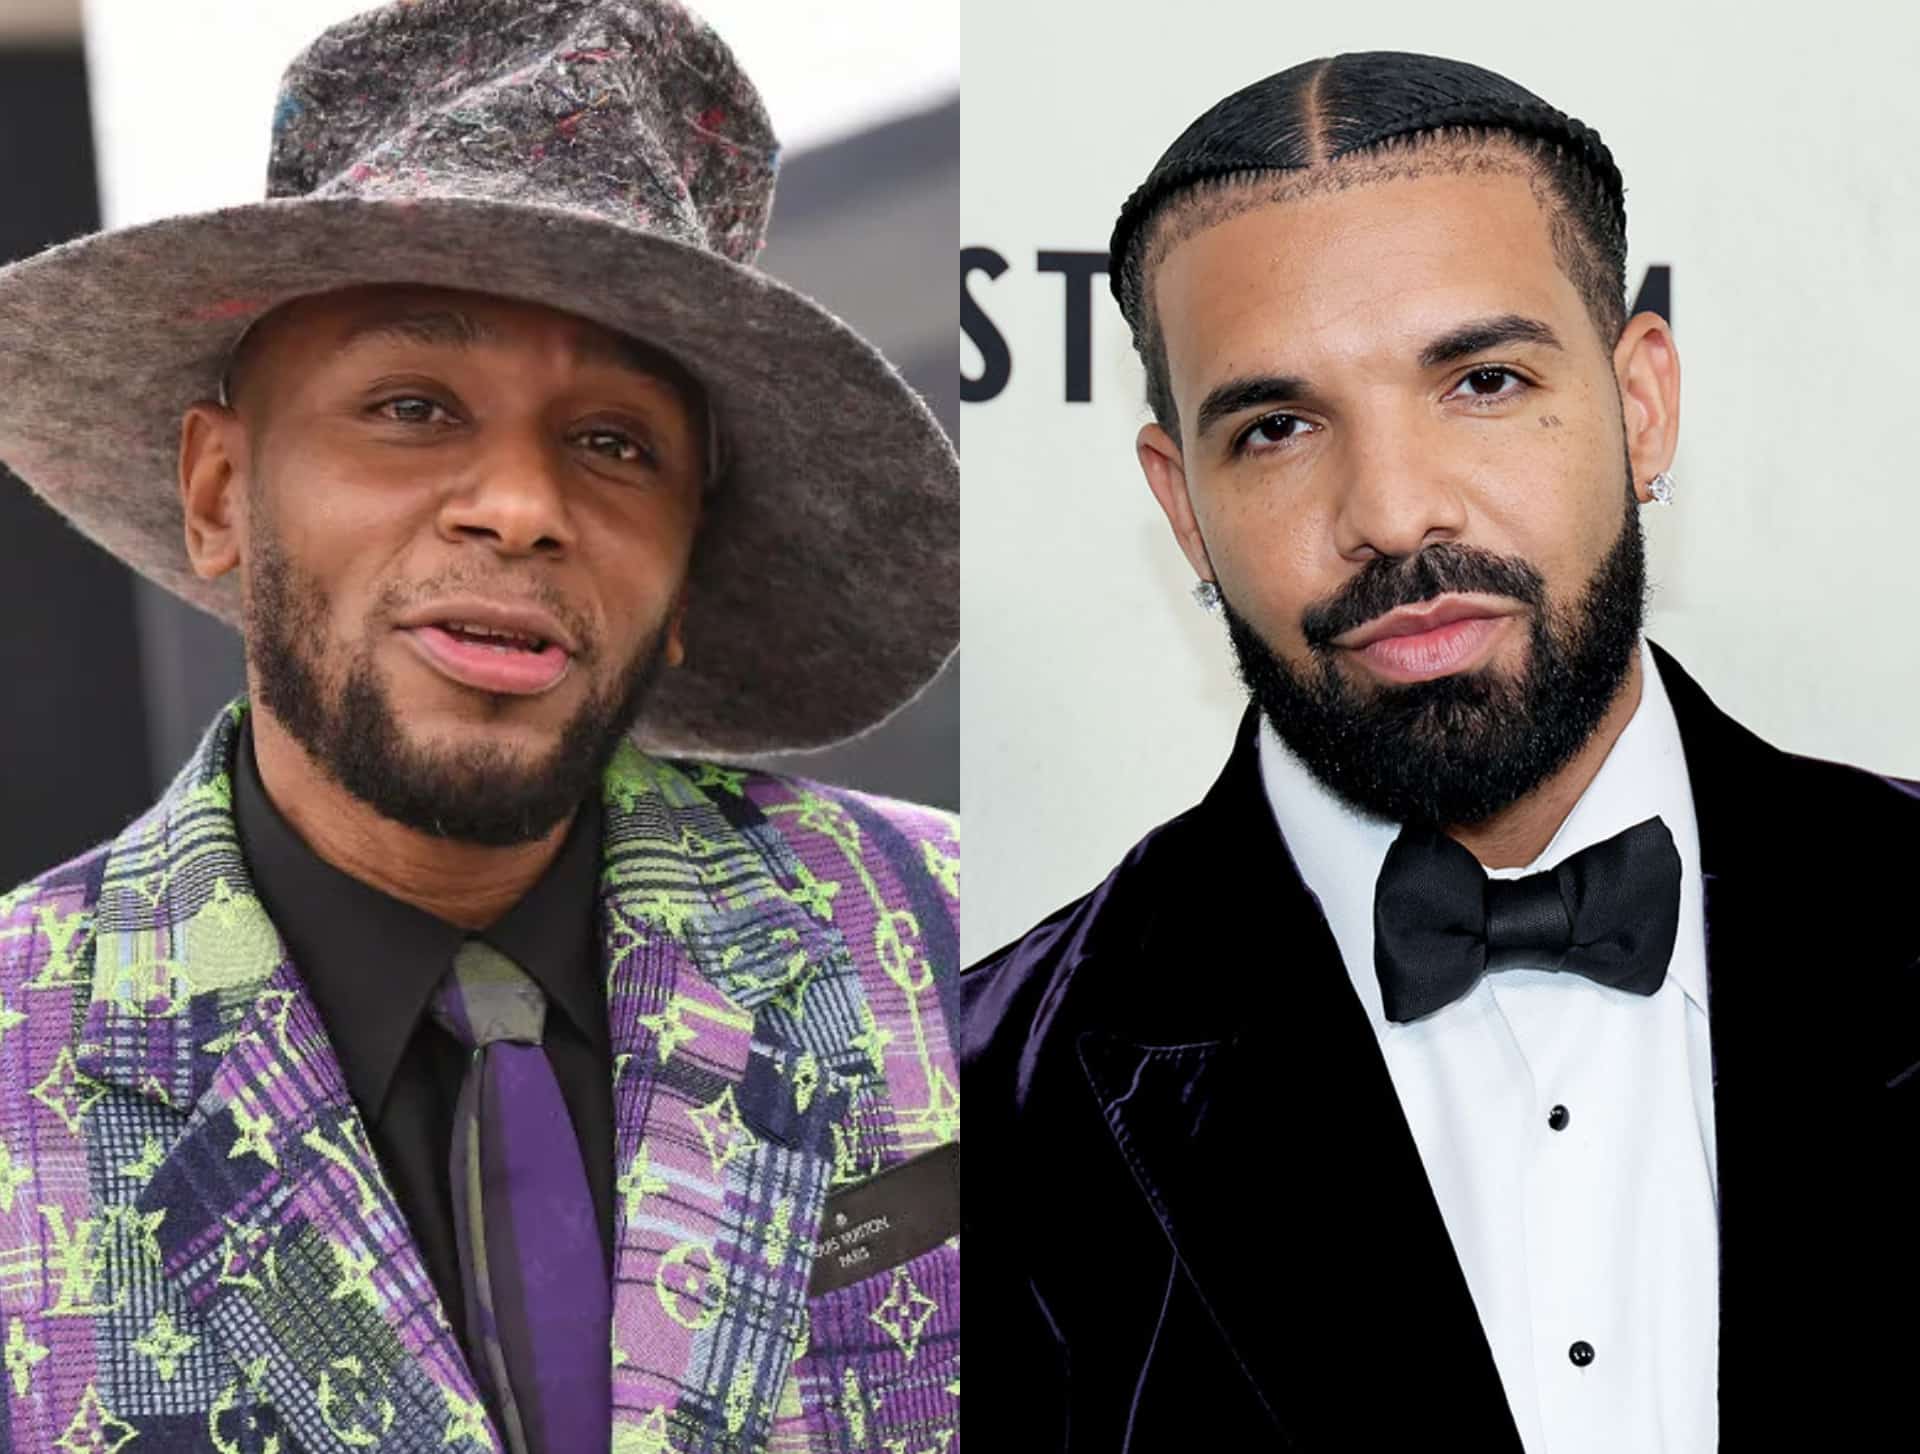 Yasiin Bey (Mos Def) Says Drake's Music is 'Pop' & 'Compatible with Shopping'